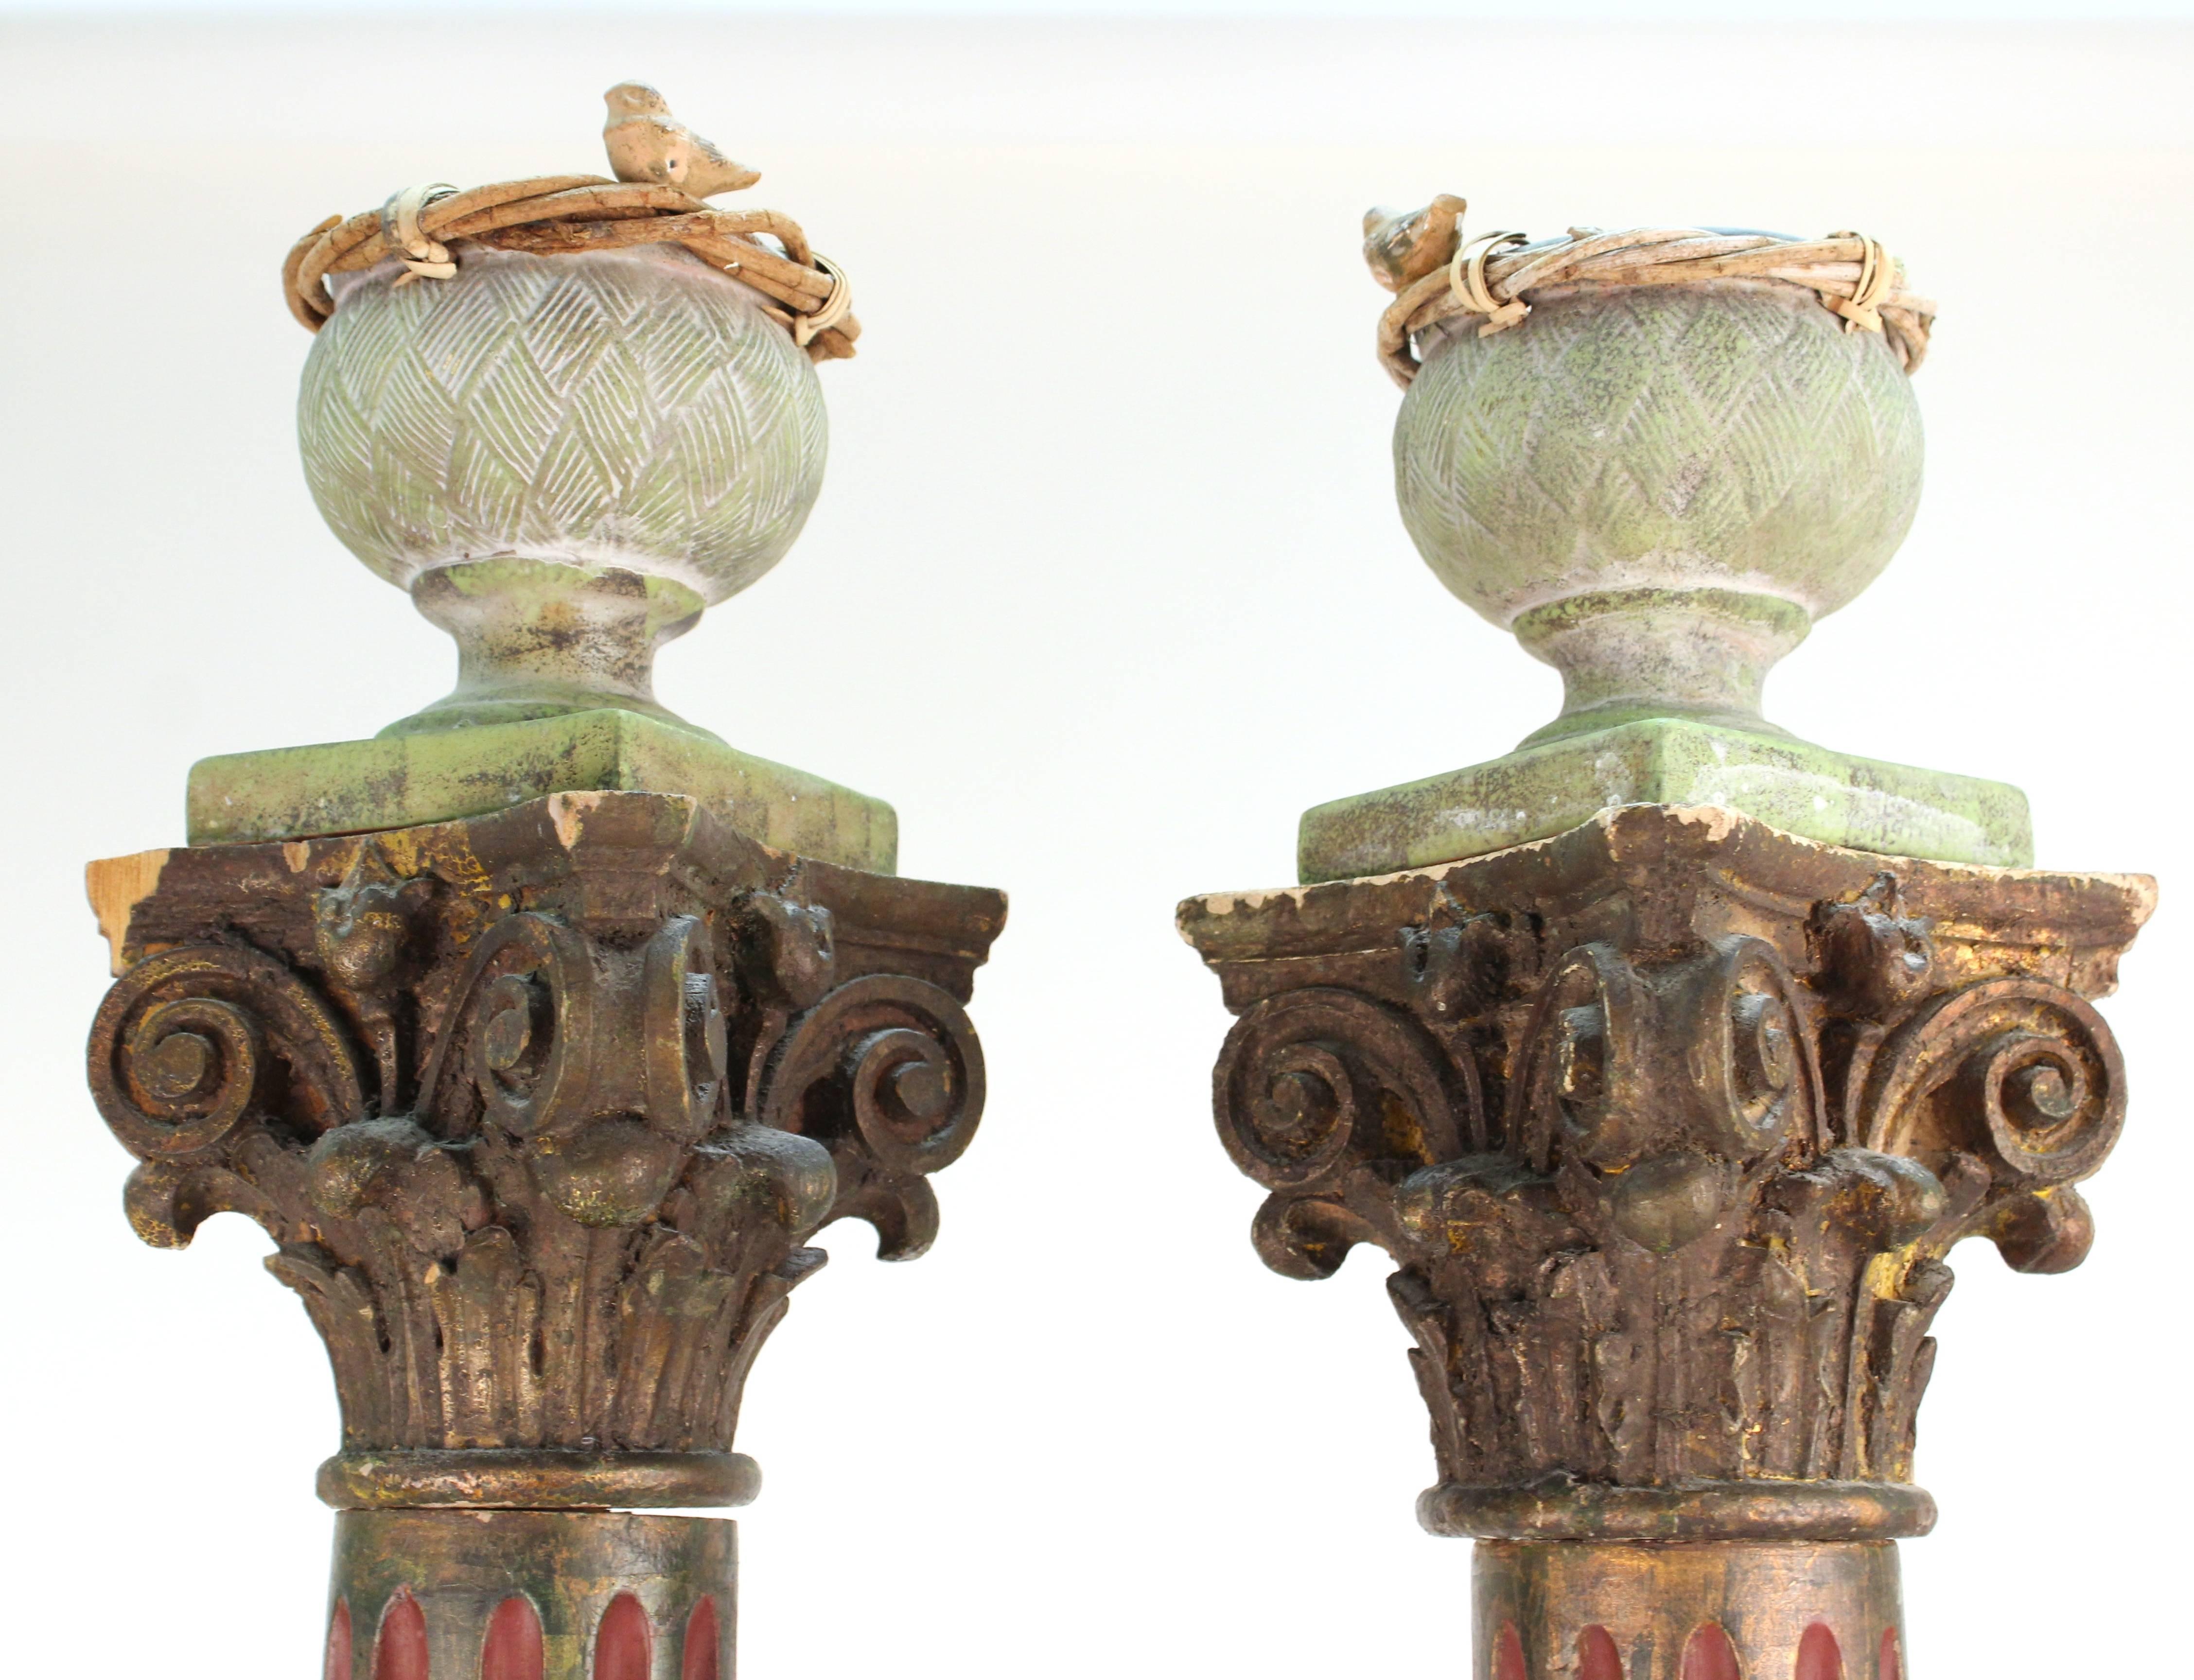 Unknown Victorian Wooden Corinthian Columns with Bird Nests on Top